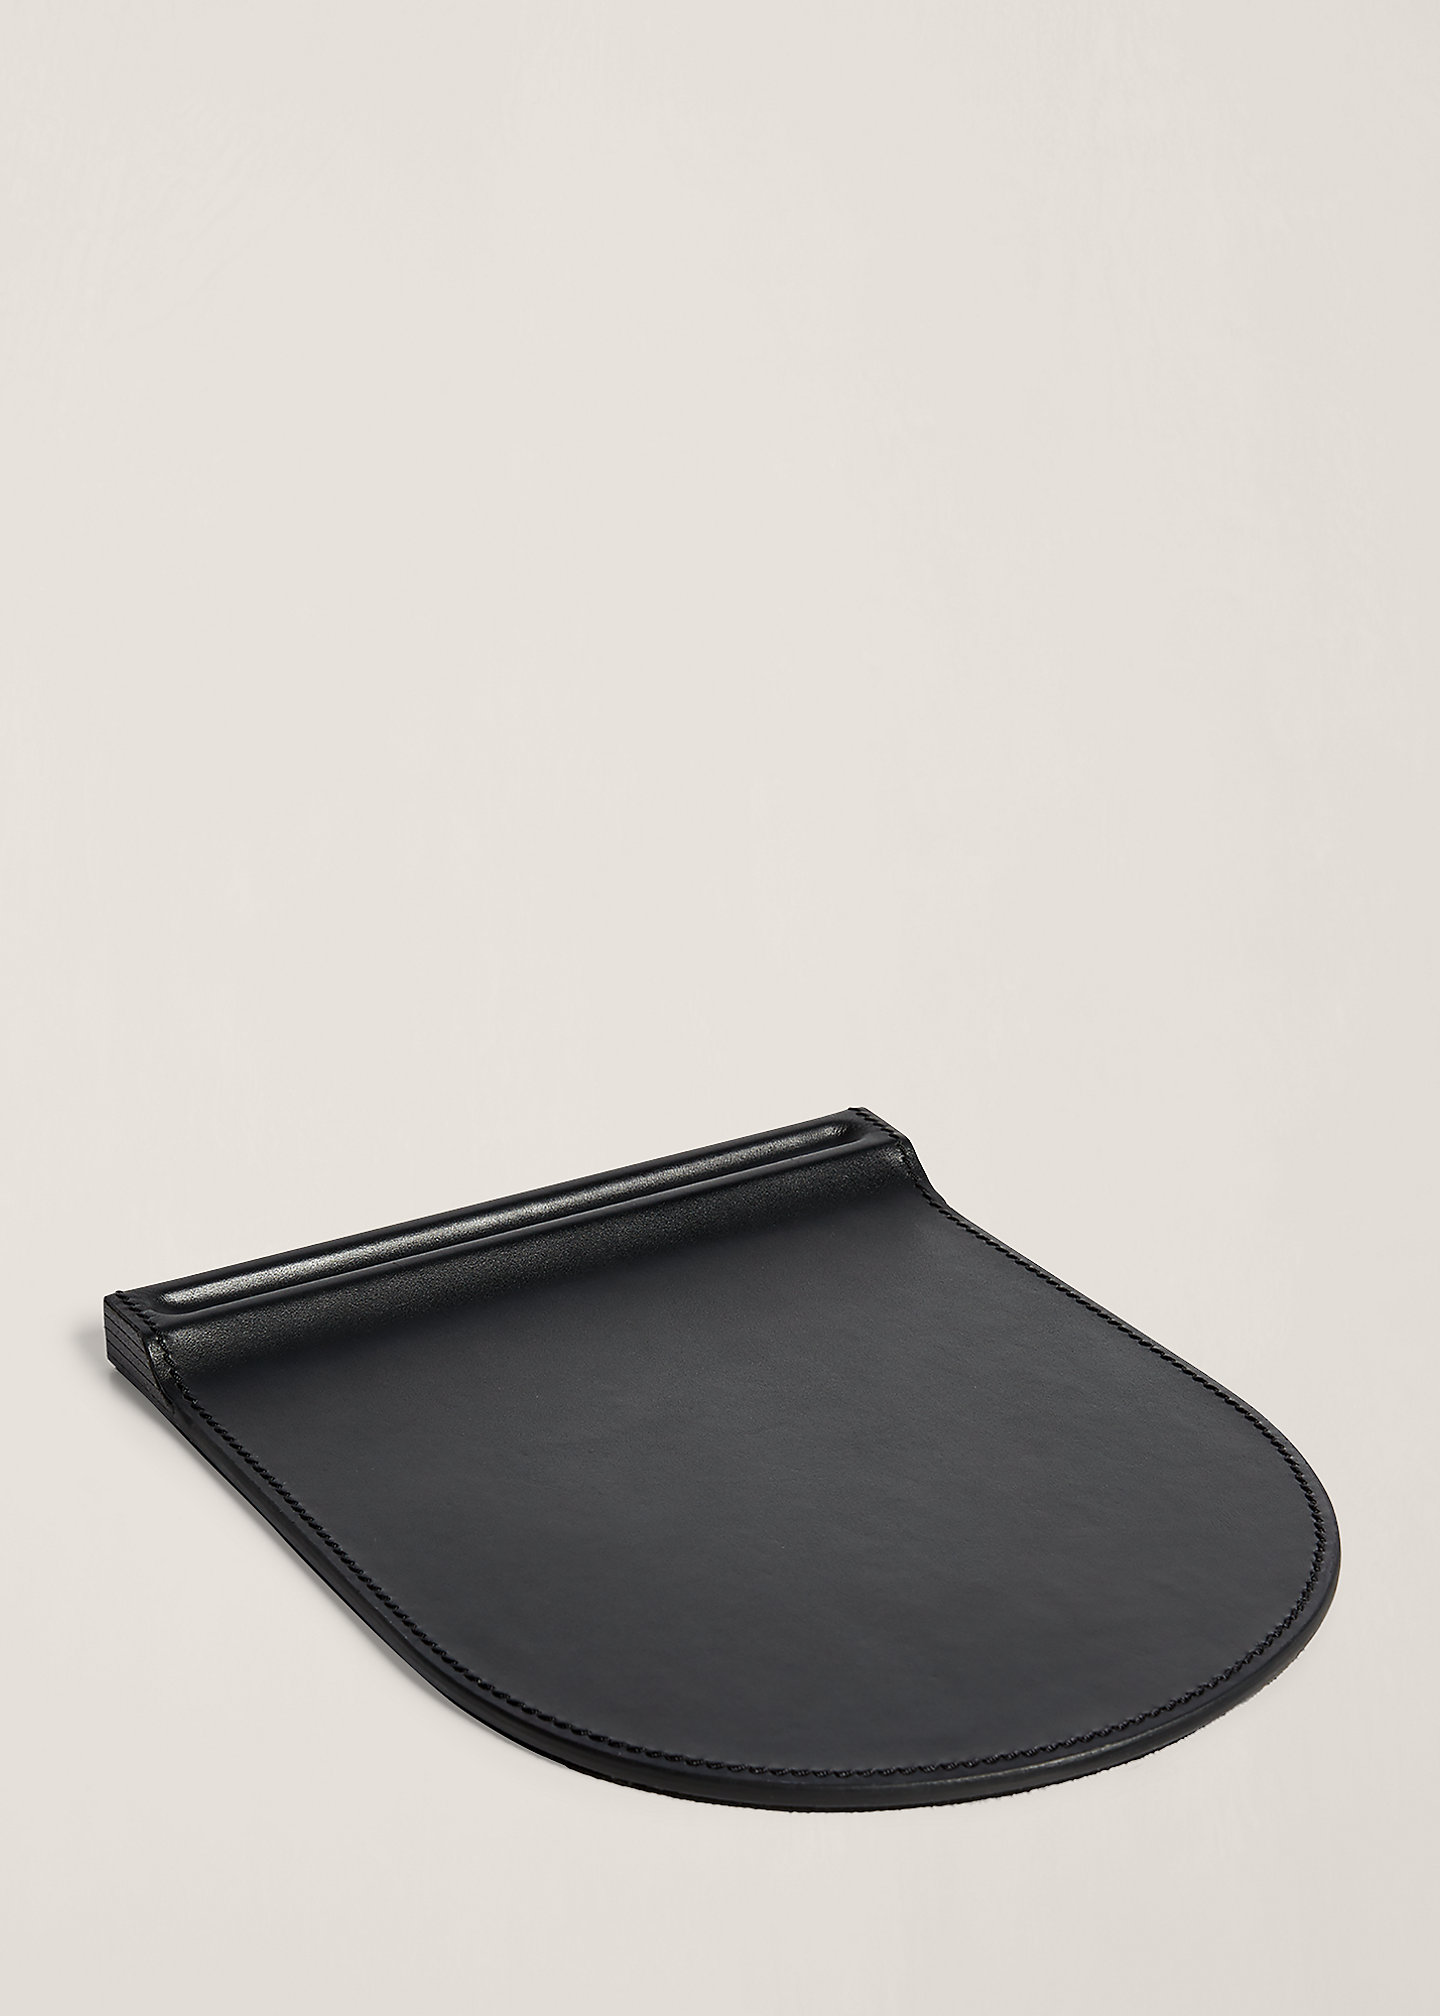 Polo Ralph Lauren Brennan Leather Mouse Pad